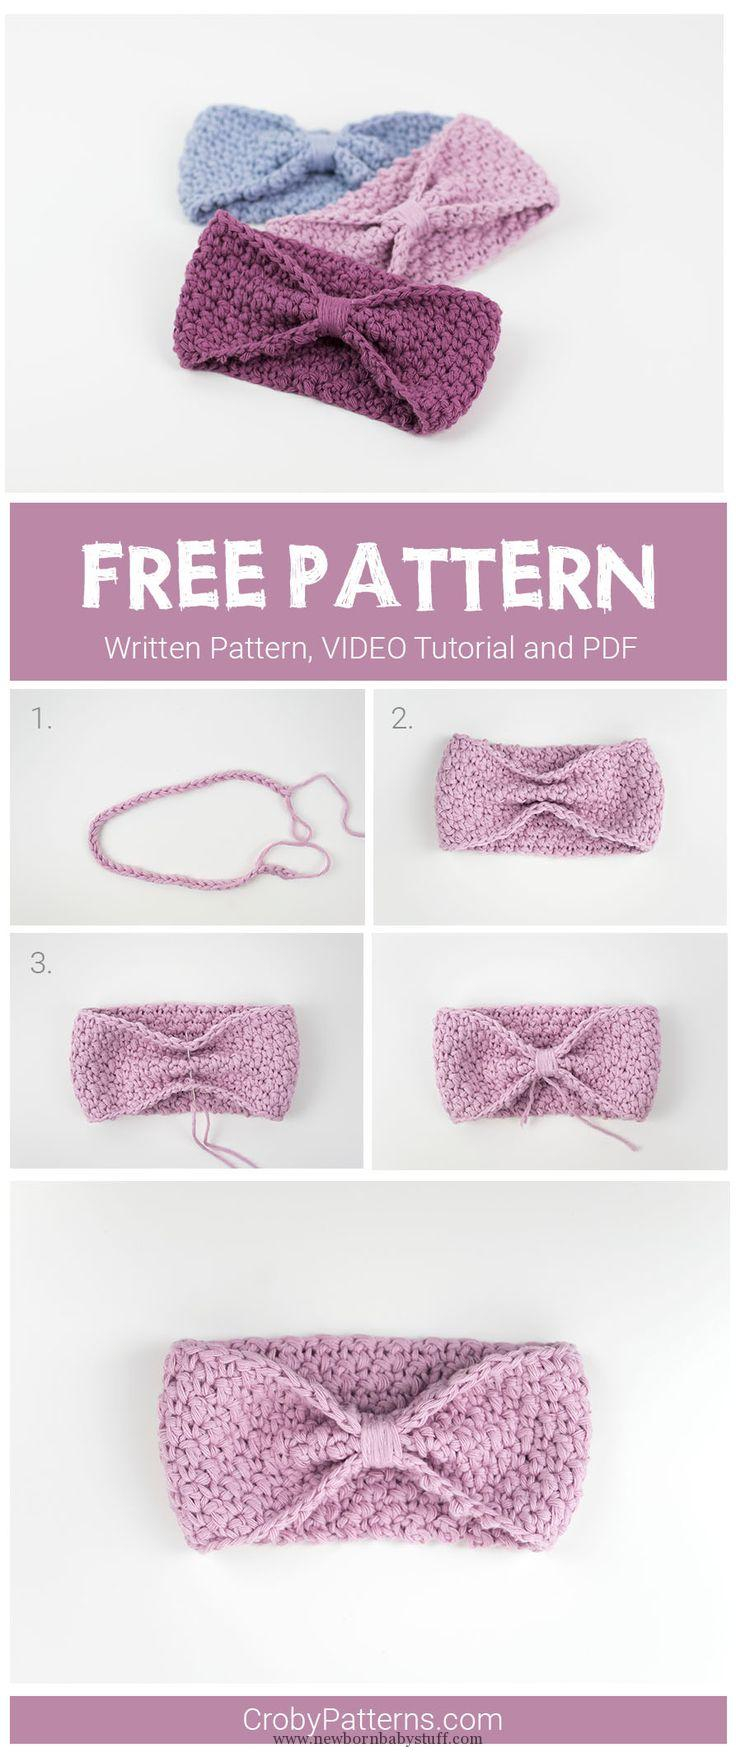 Free Knitting Patterns For Headbands Ba Knitting Patterns Simple And Easy To Make Crochet Headband For